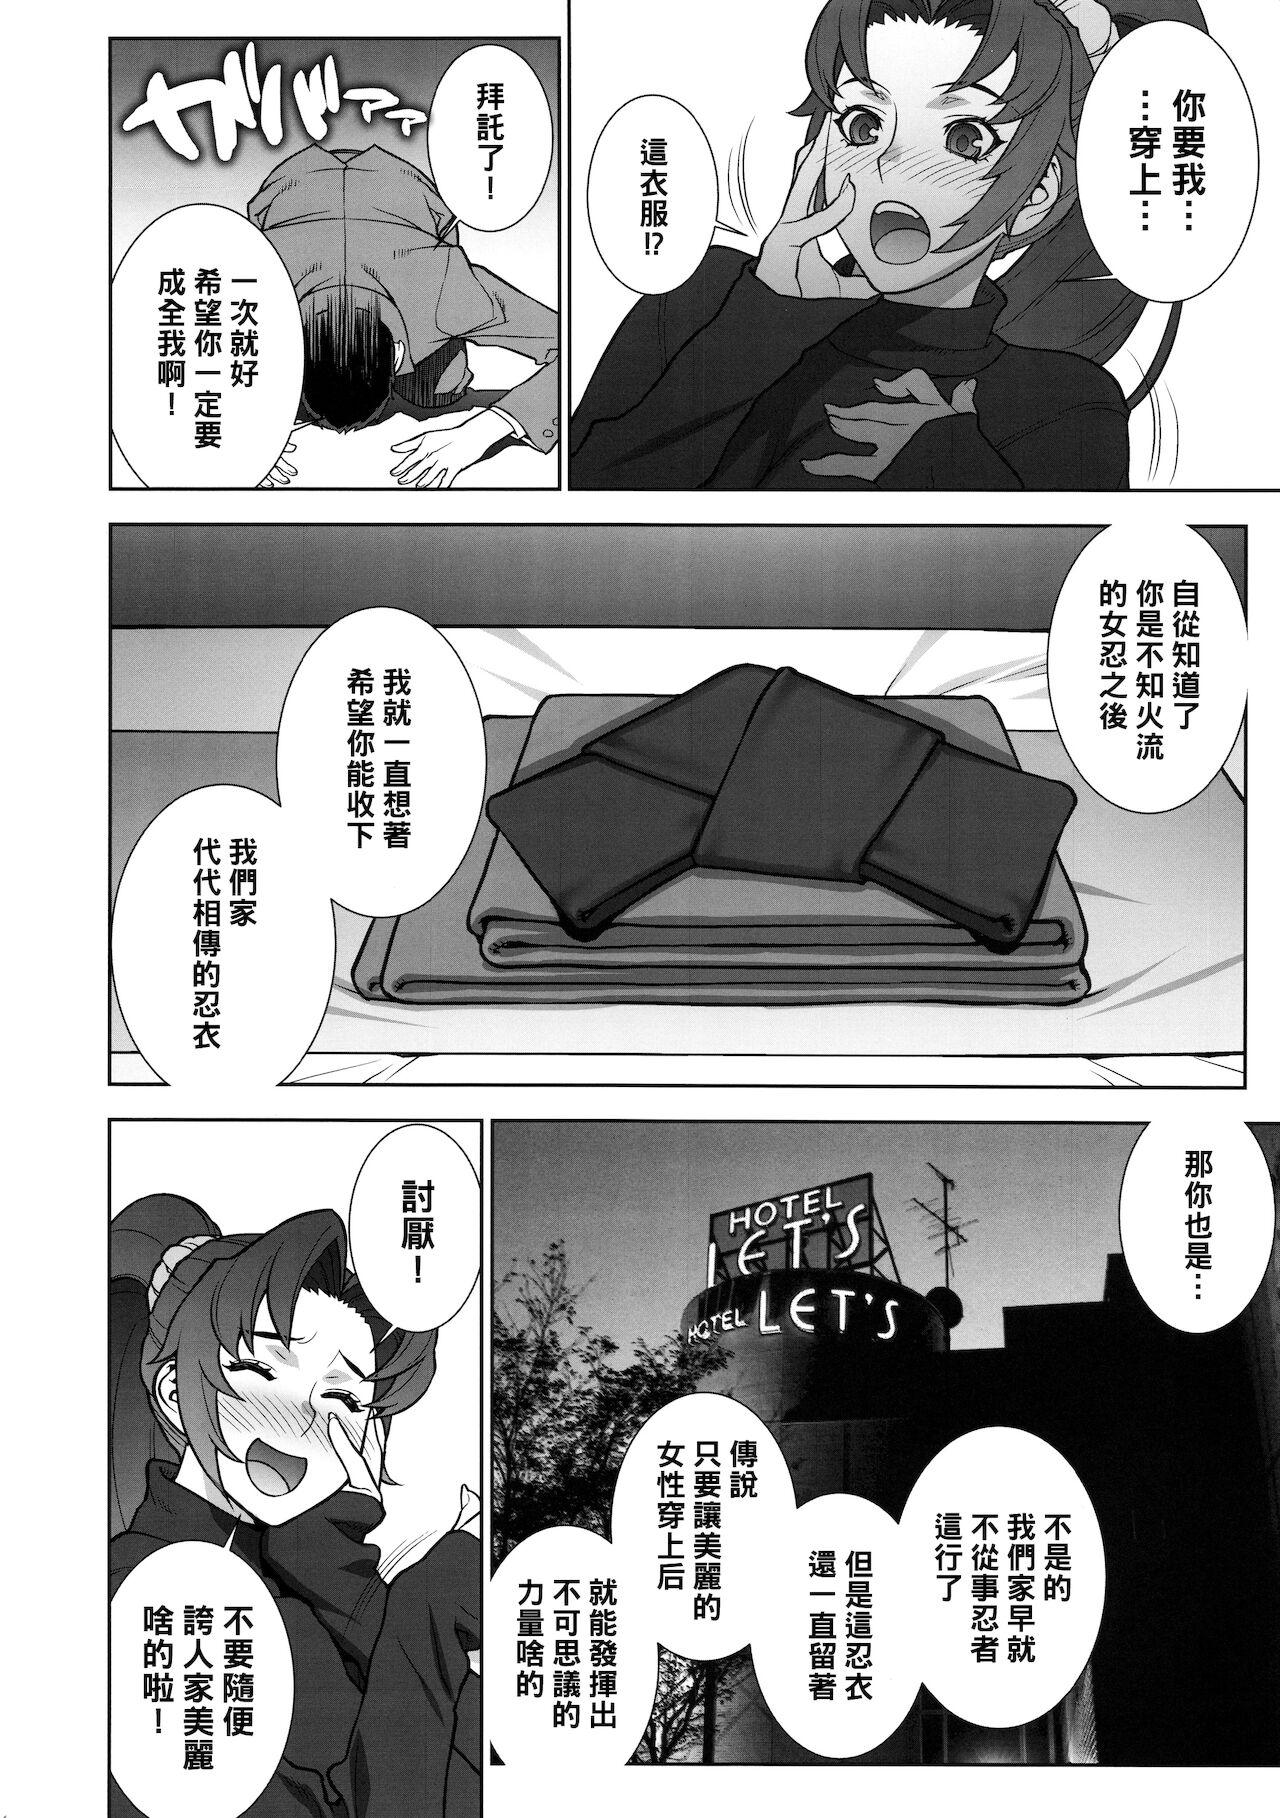 Home Domidare Kachousen - King of fighters Point Of View - Page 5